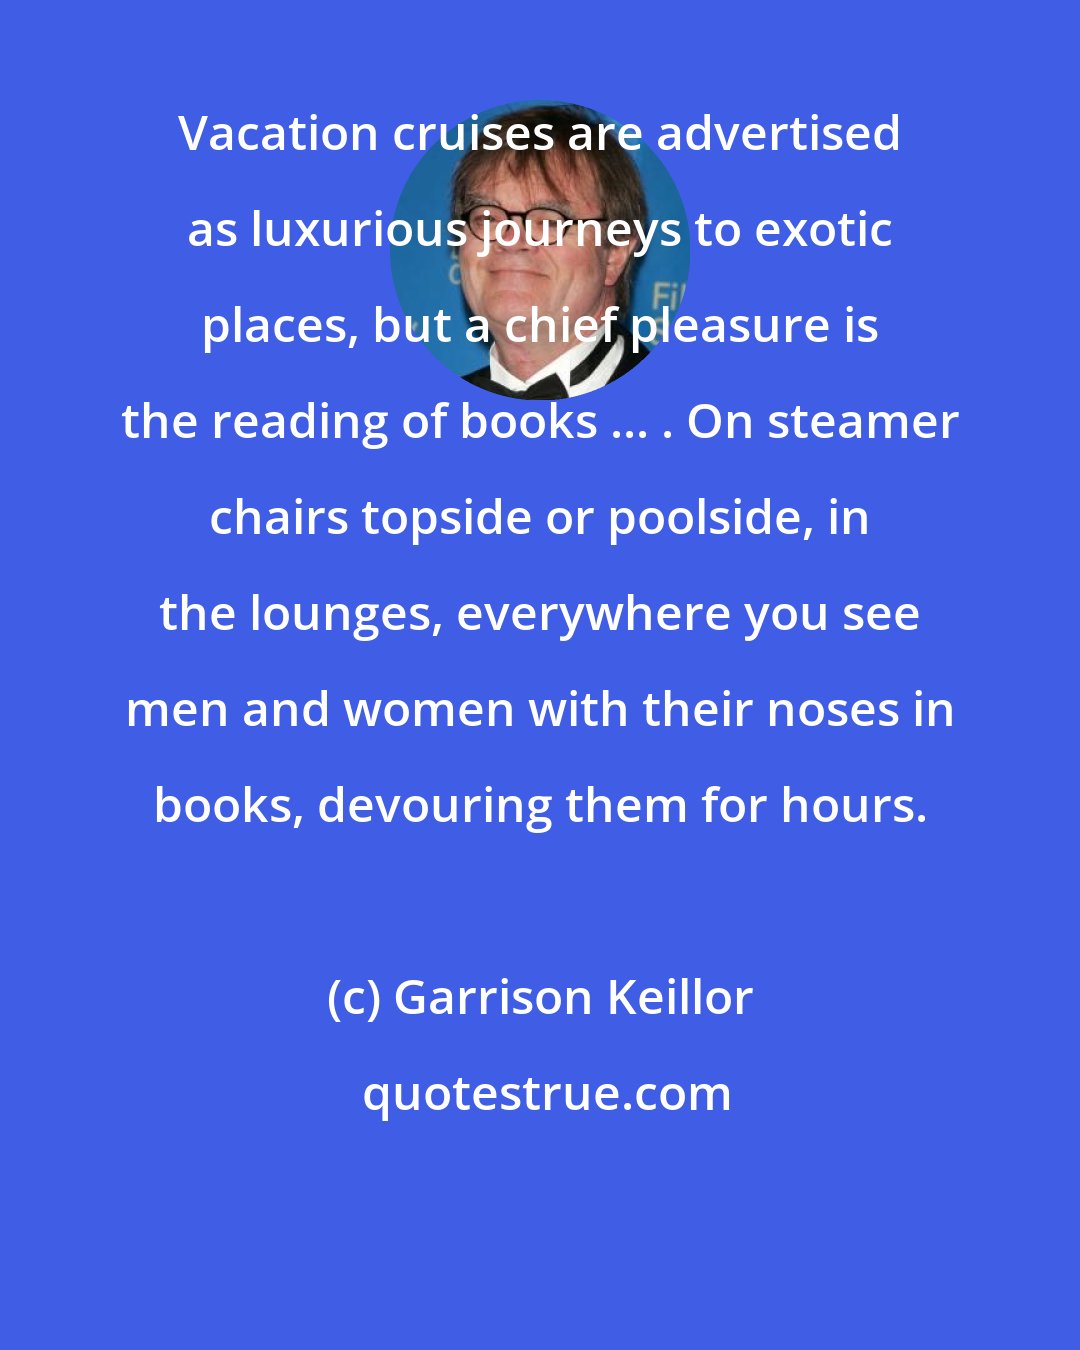 Garrison Keillor: Vacation cruises are advertised as luxurious journeys to exotic places, but a chief pleasure is the reading of books ... . On steamer chairs topside or poolside, in the lounges, everywhere you see men and women with their noses in books, devouring them for hours.